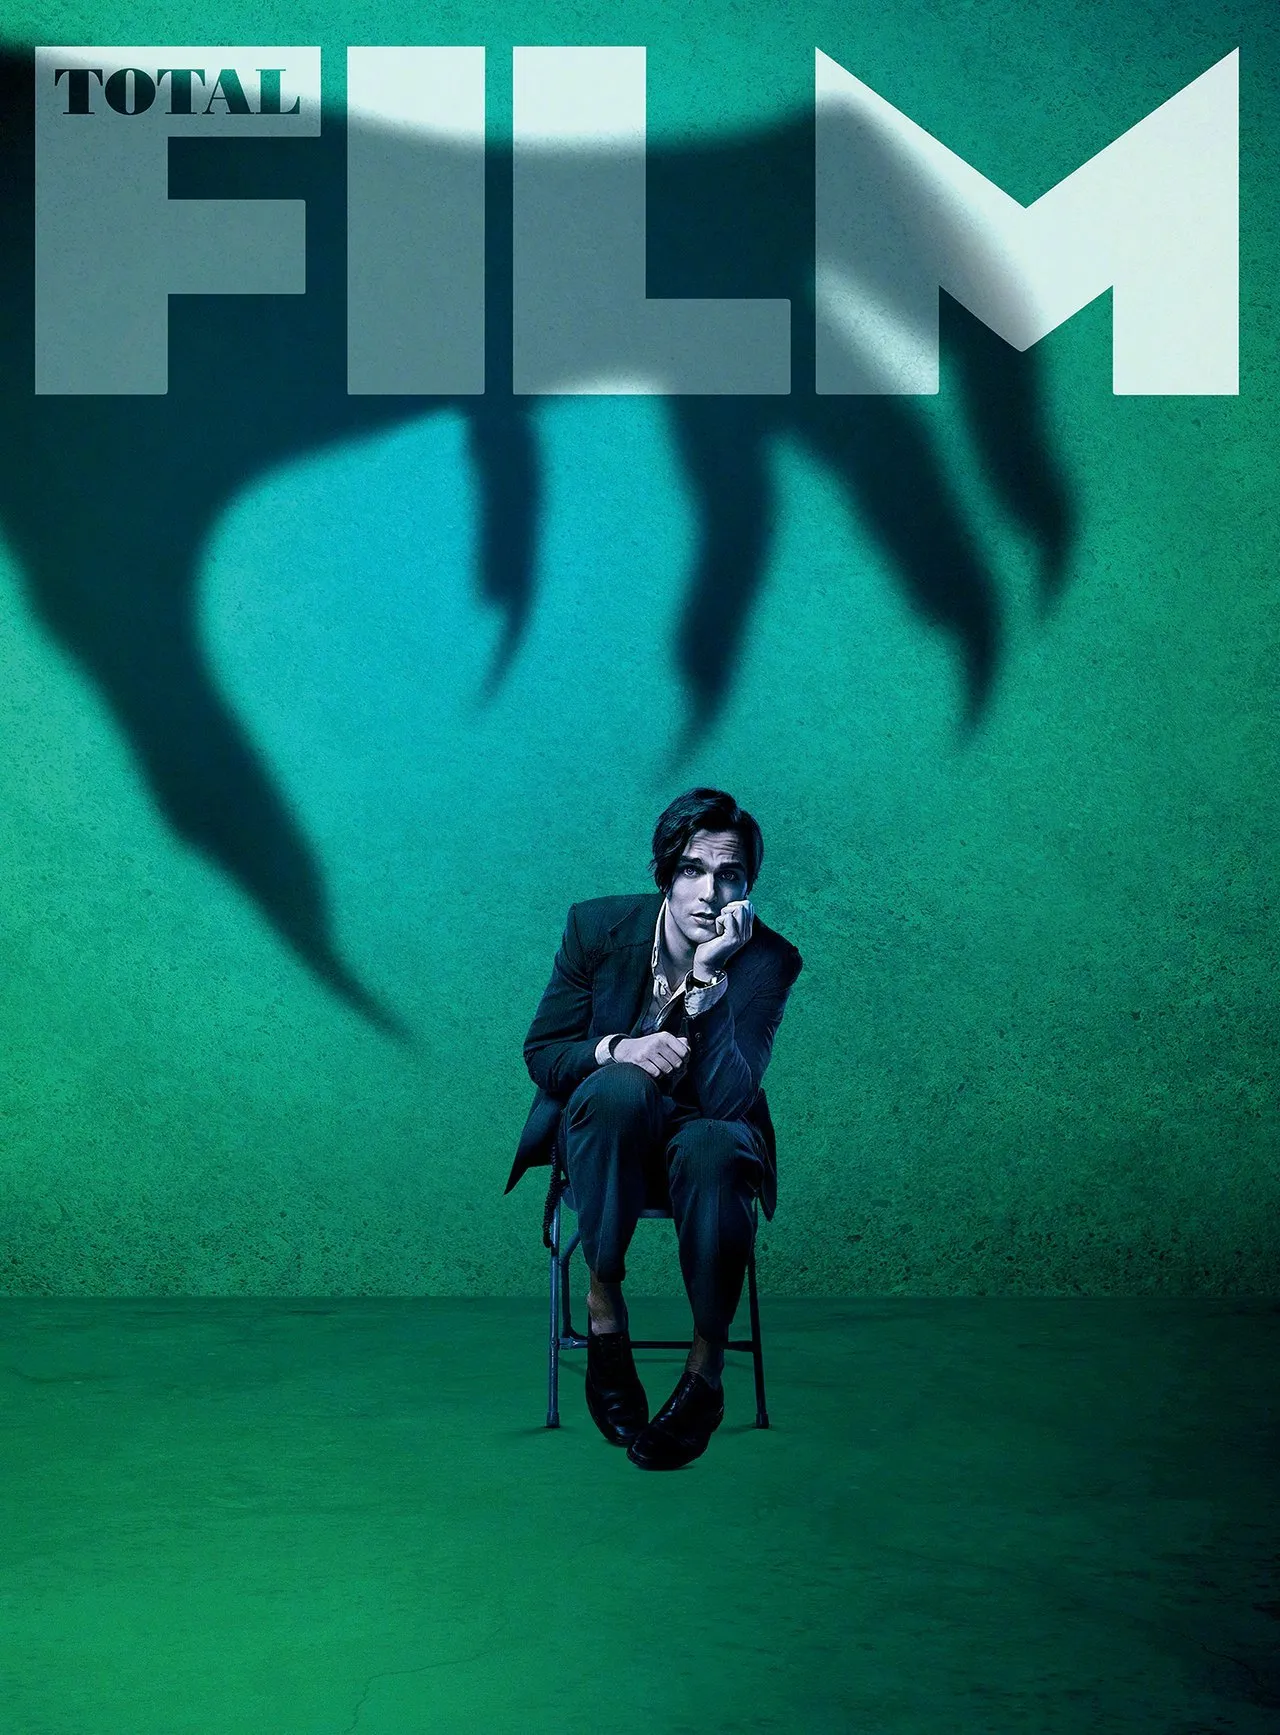 'Renfield' on cover of new 'Total Film' issue | FMV6